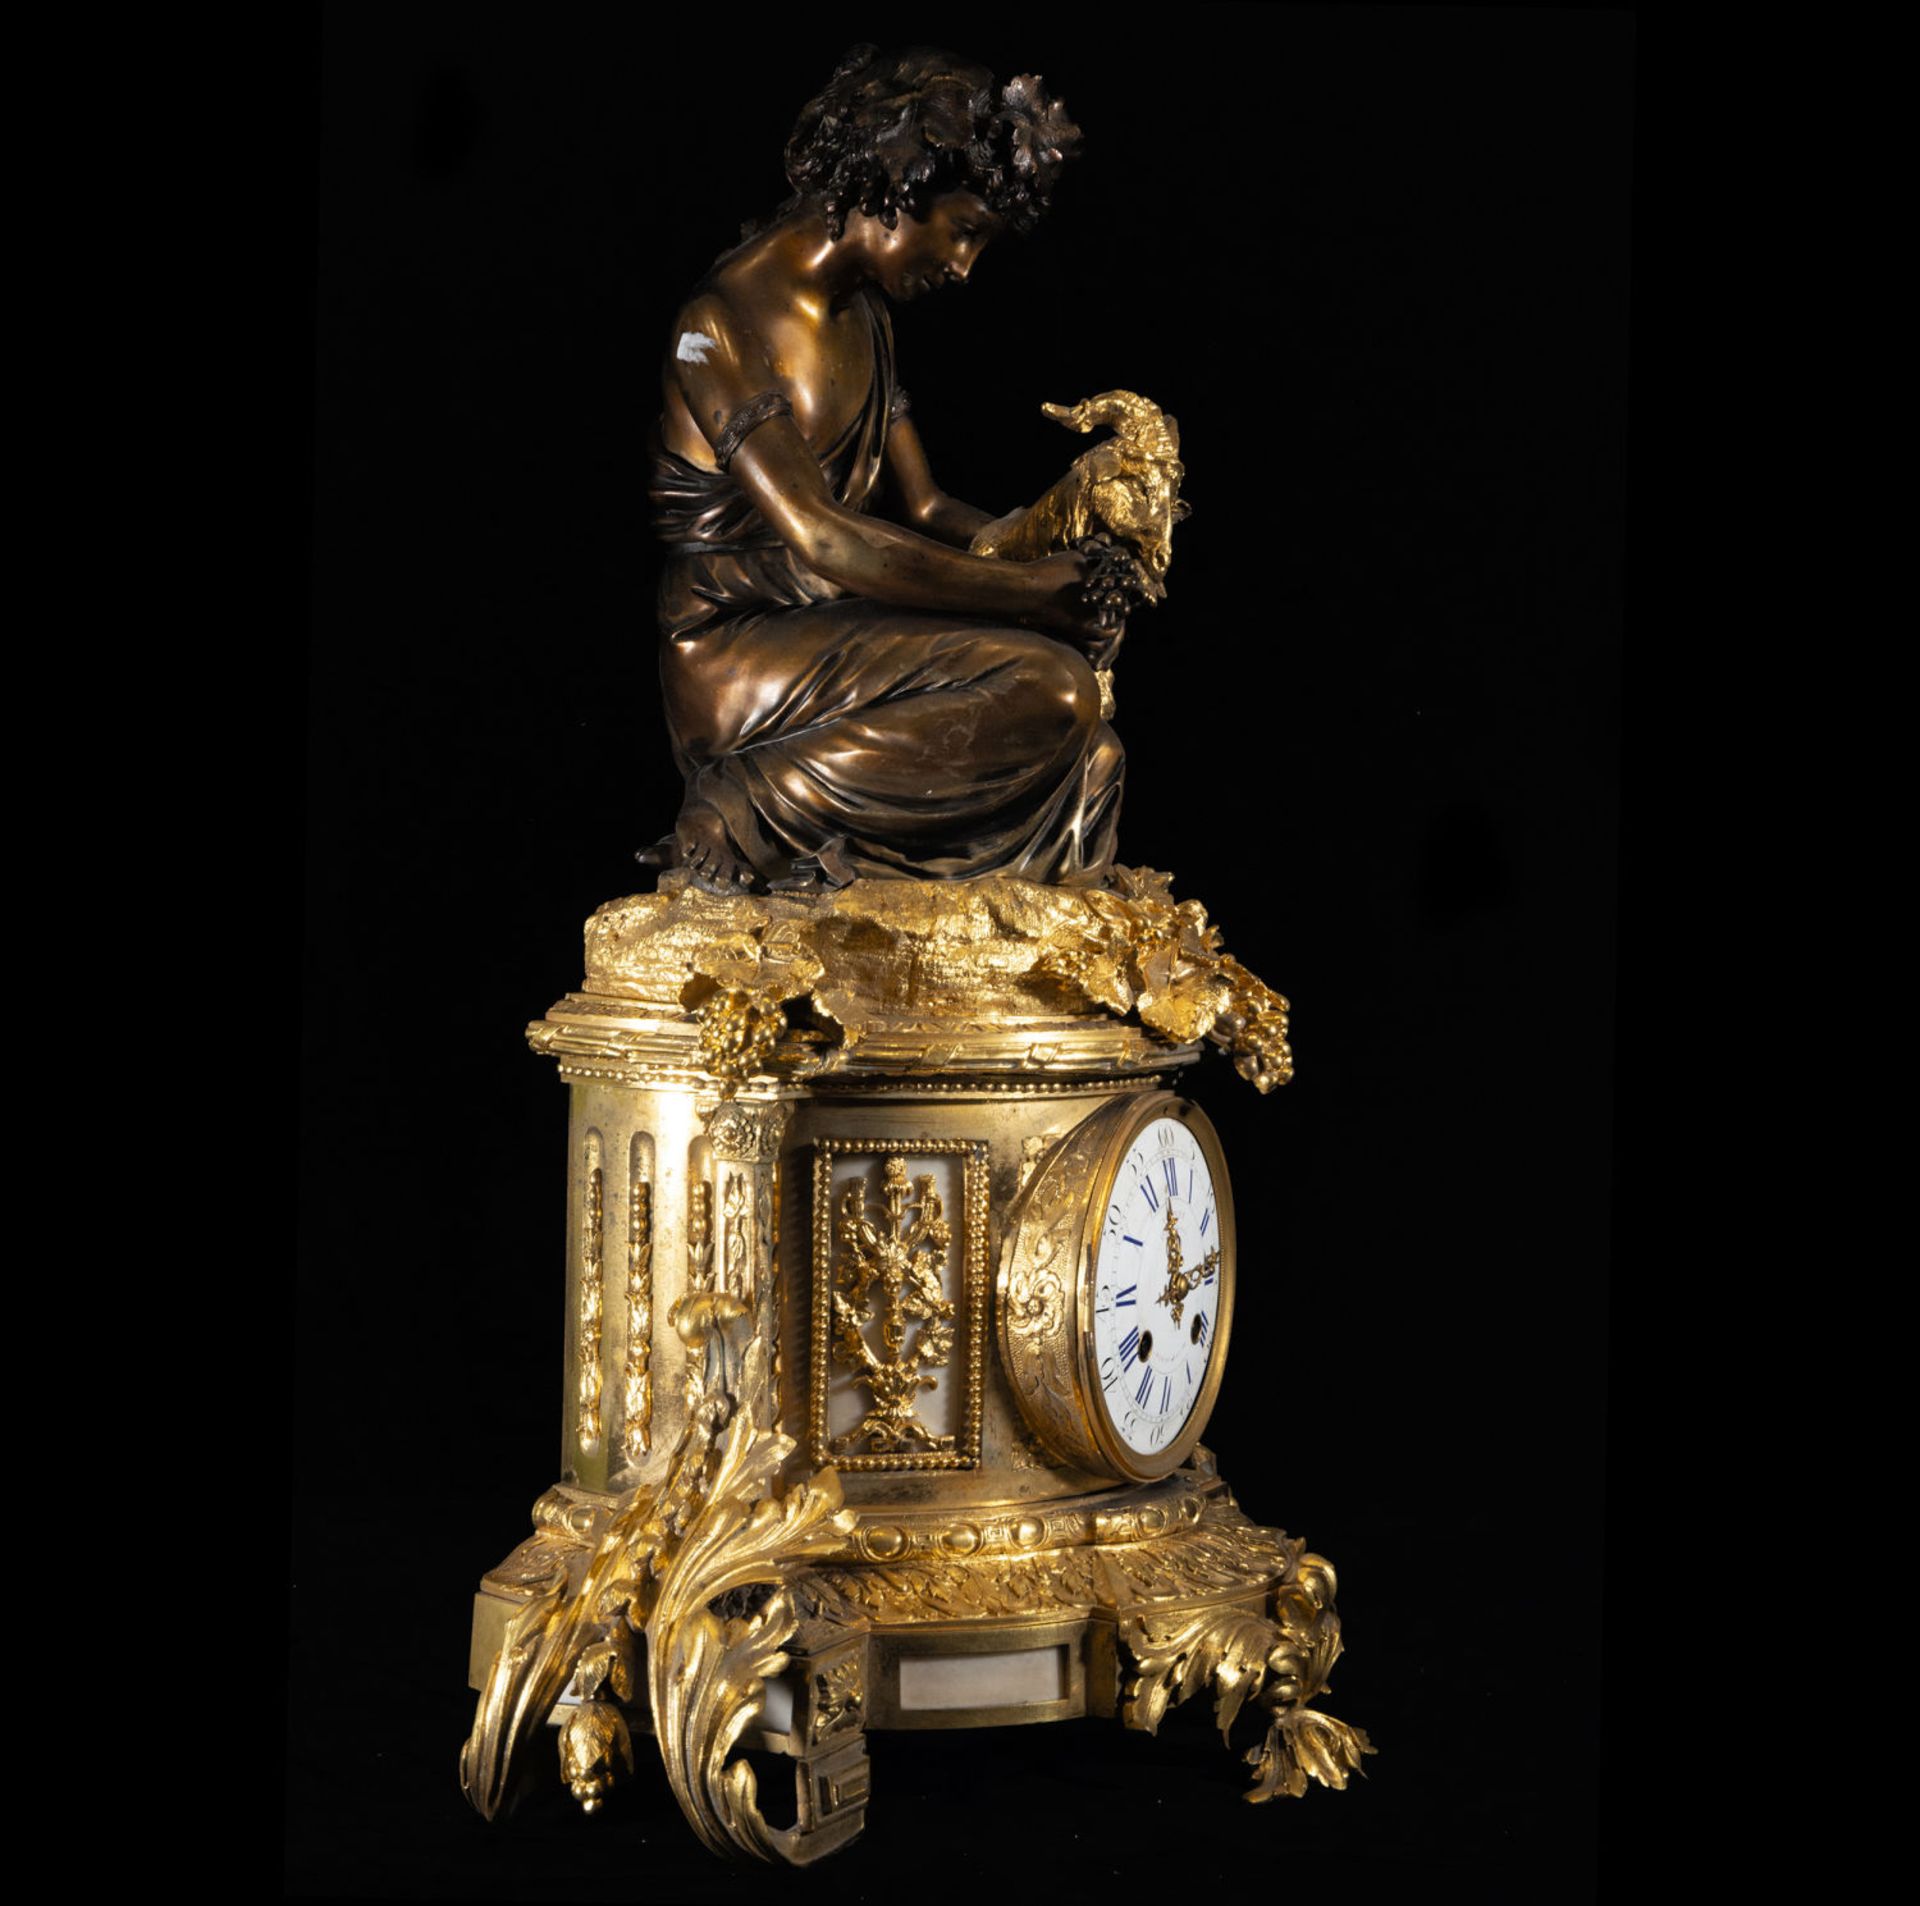 Exquisite Large French Table Clock in Mercury-Gilded Bronze and Alabaster with Bacchus and Goat, Nap - Image 7 of 9